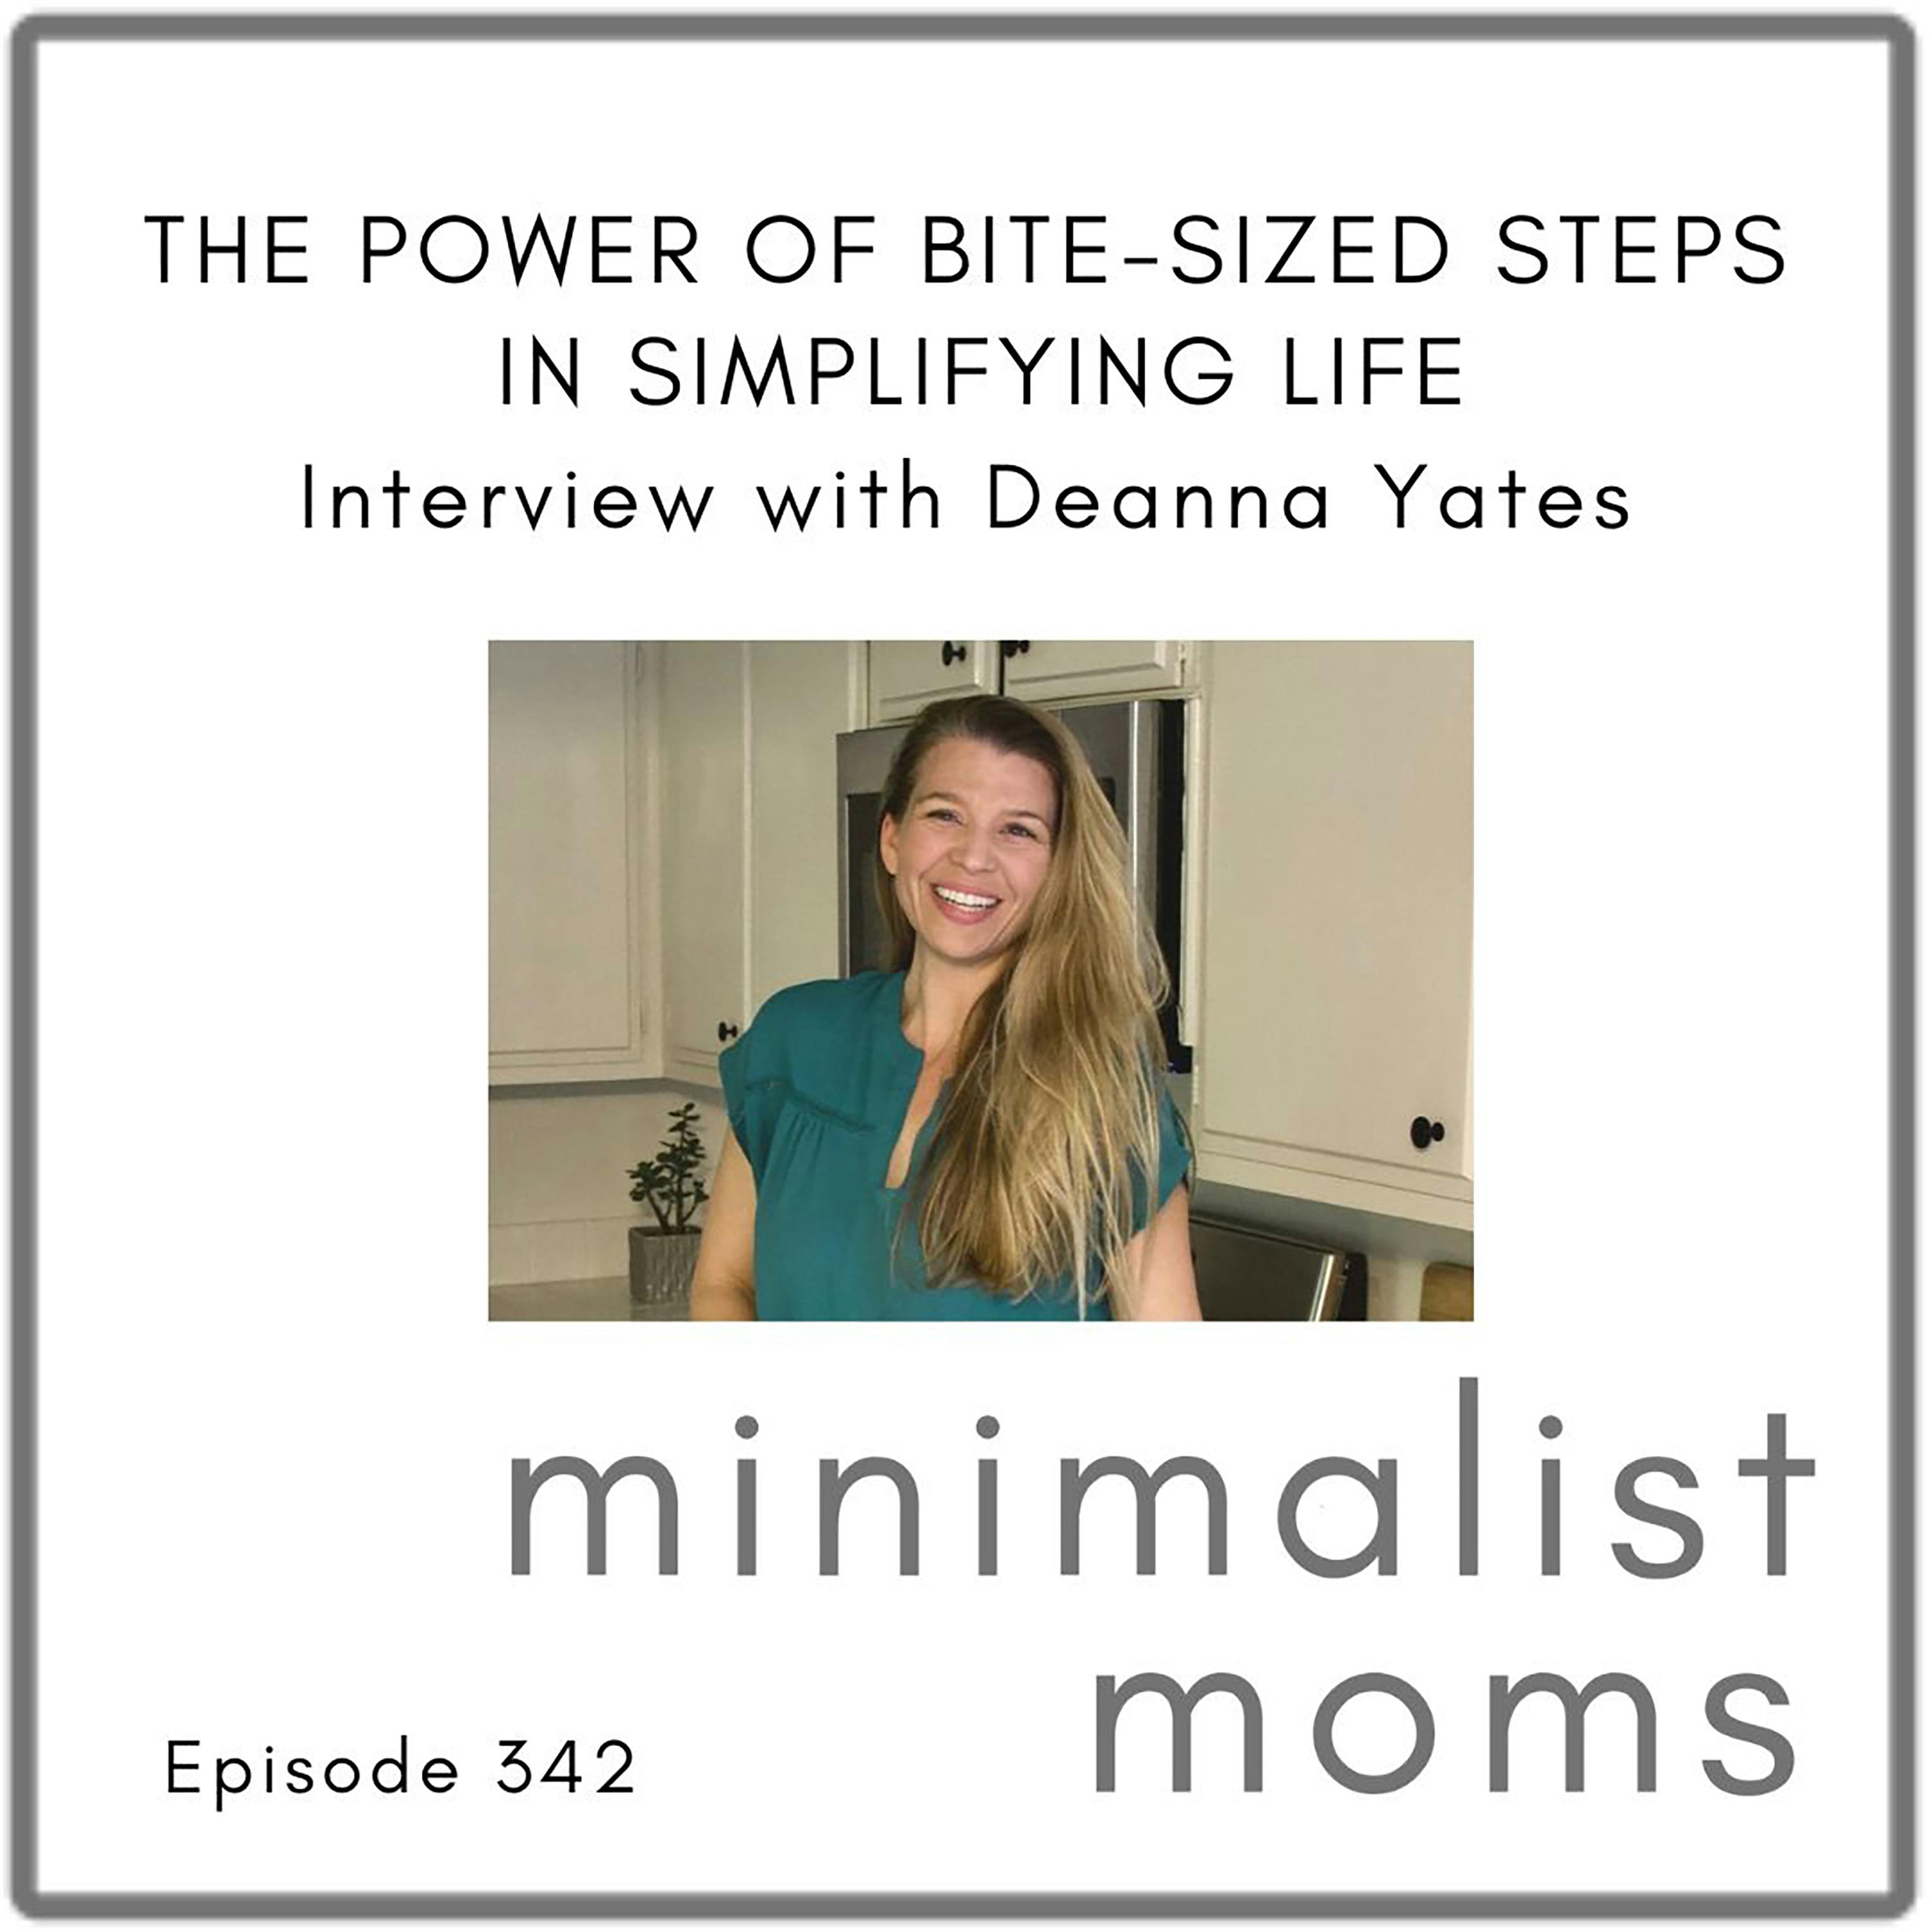 The Power of Bite-Sized Steps in Simplifying Life with Deanna Yates